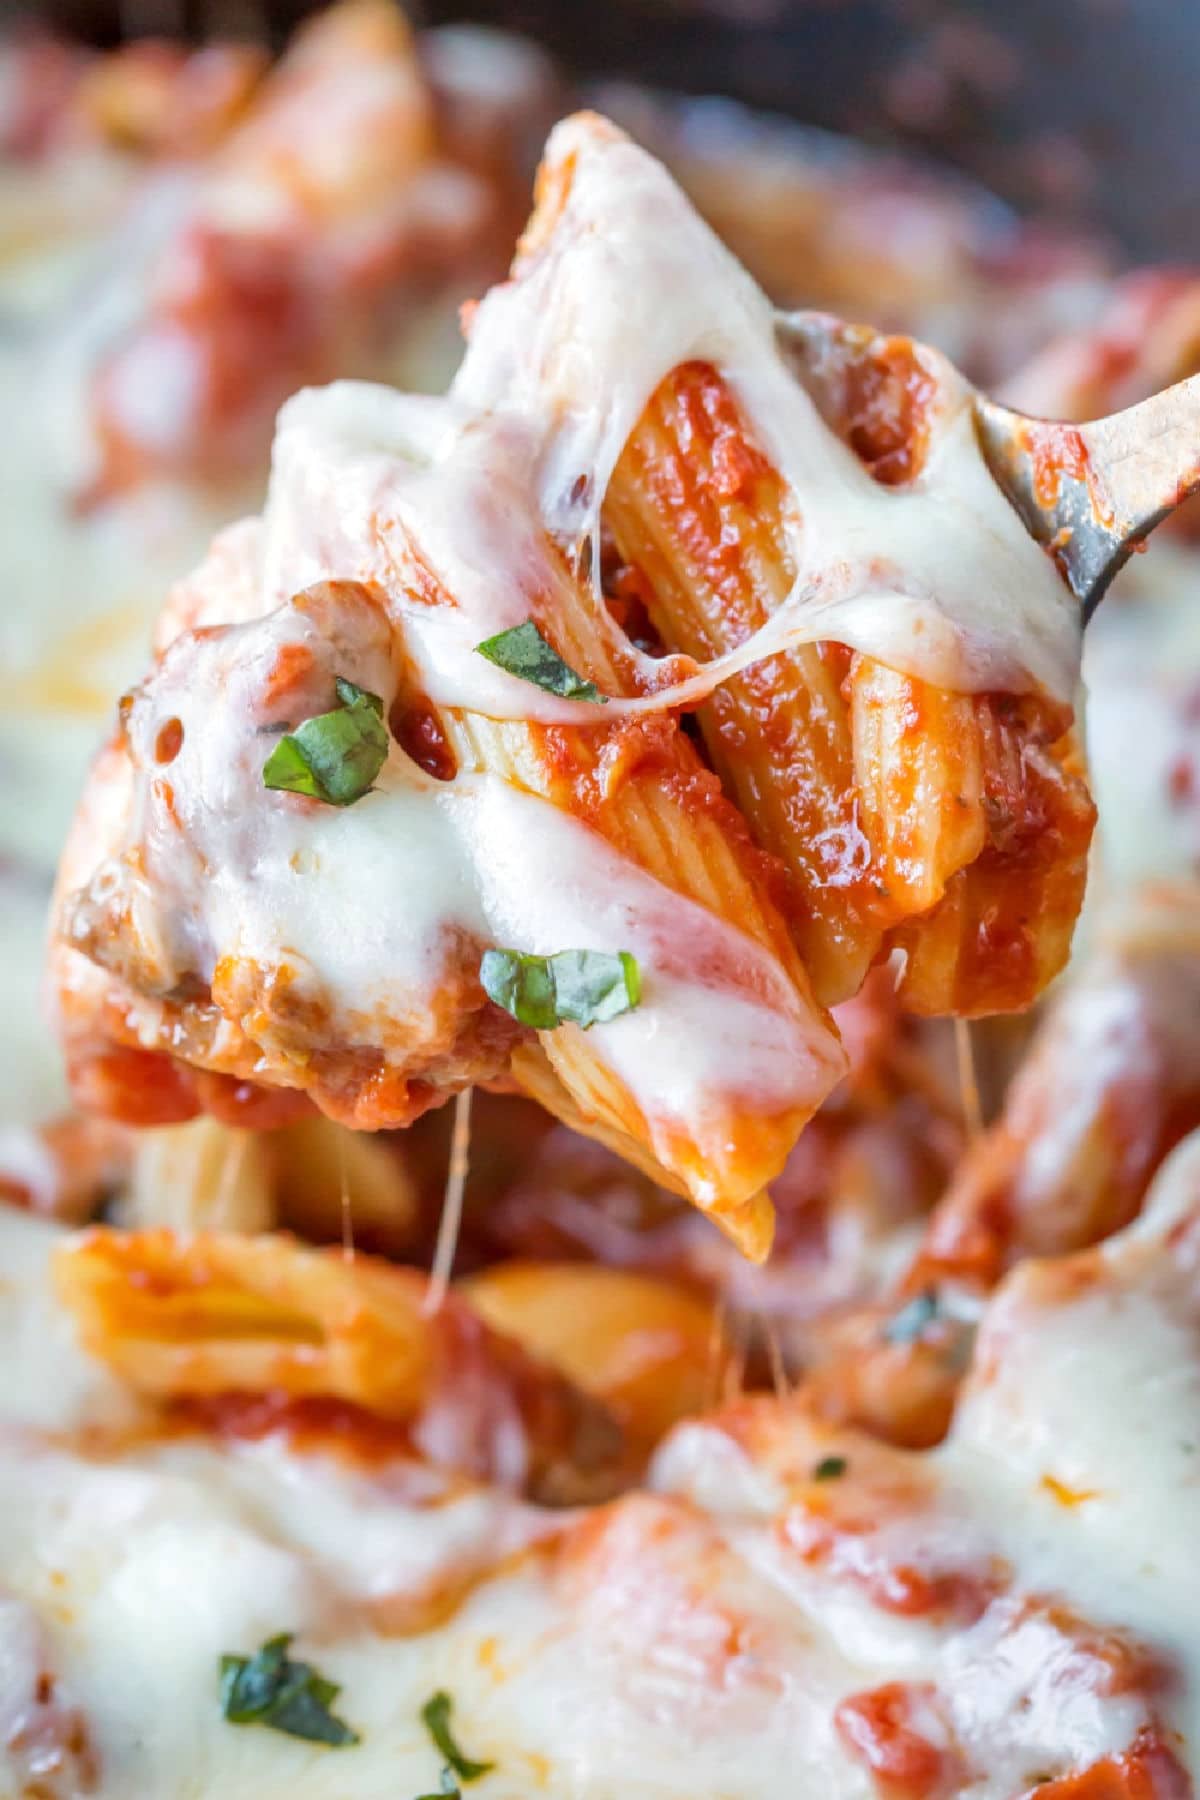 A spoon scooping up slow cooker baked ziti.